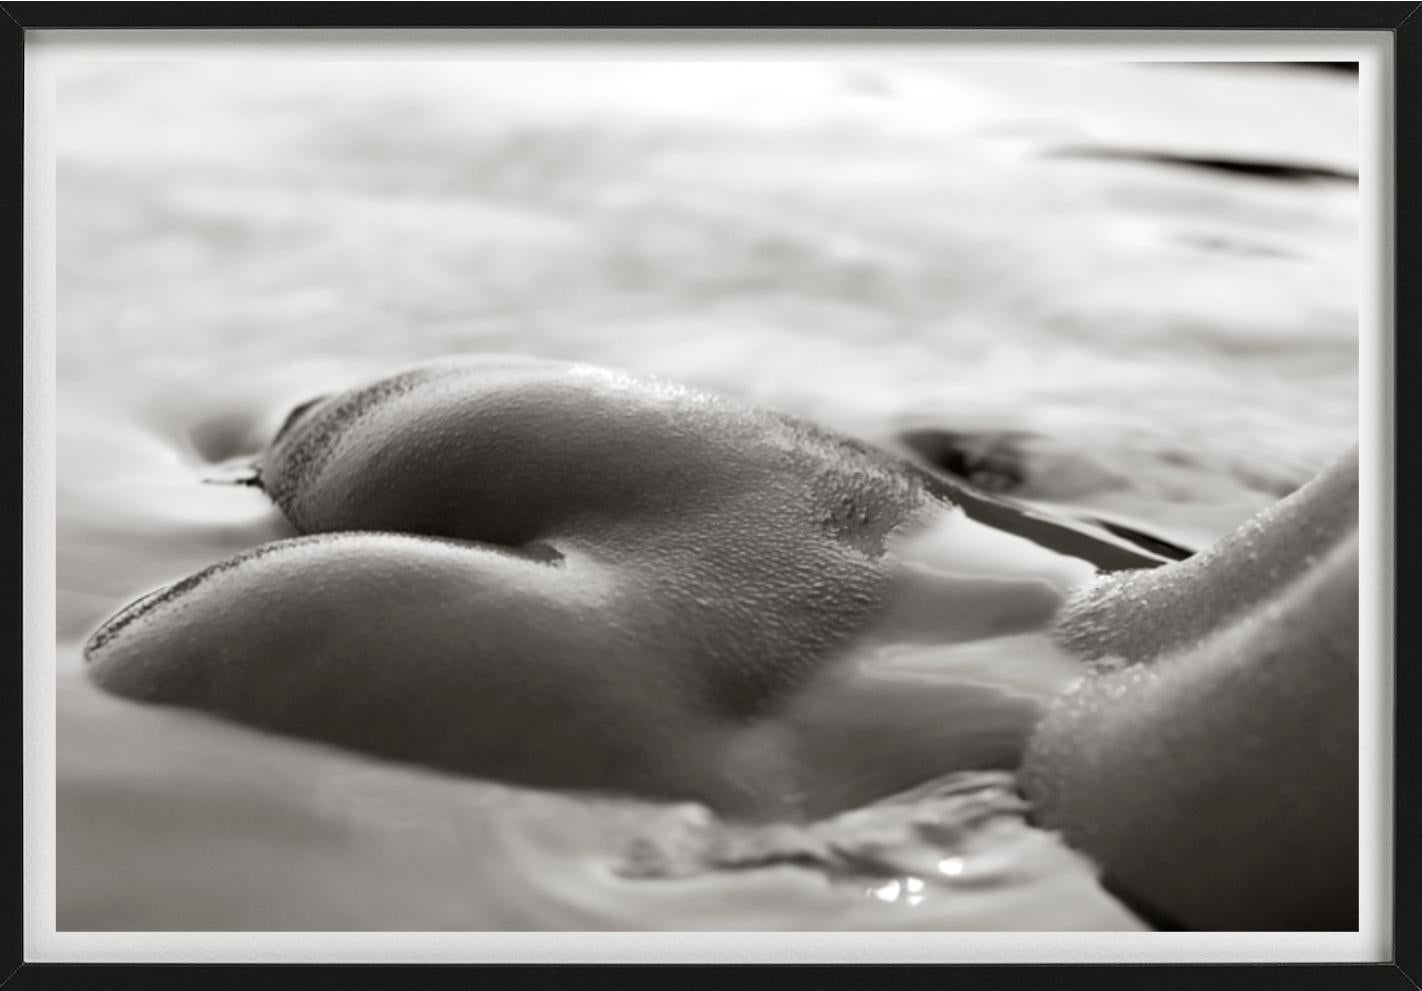 Gaia in Water, Greece - Nude Model swimming, fine art photography - Photograph by Guido Argentini